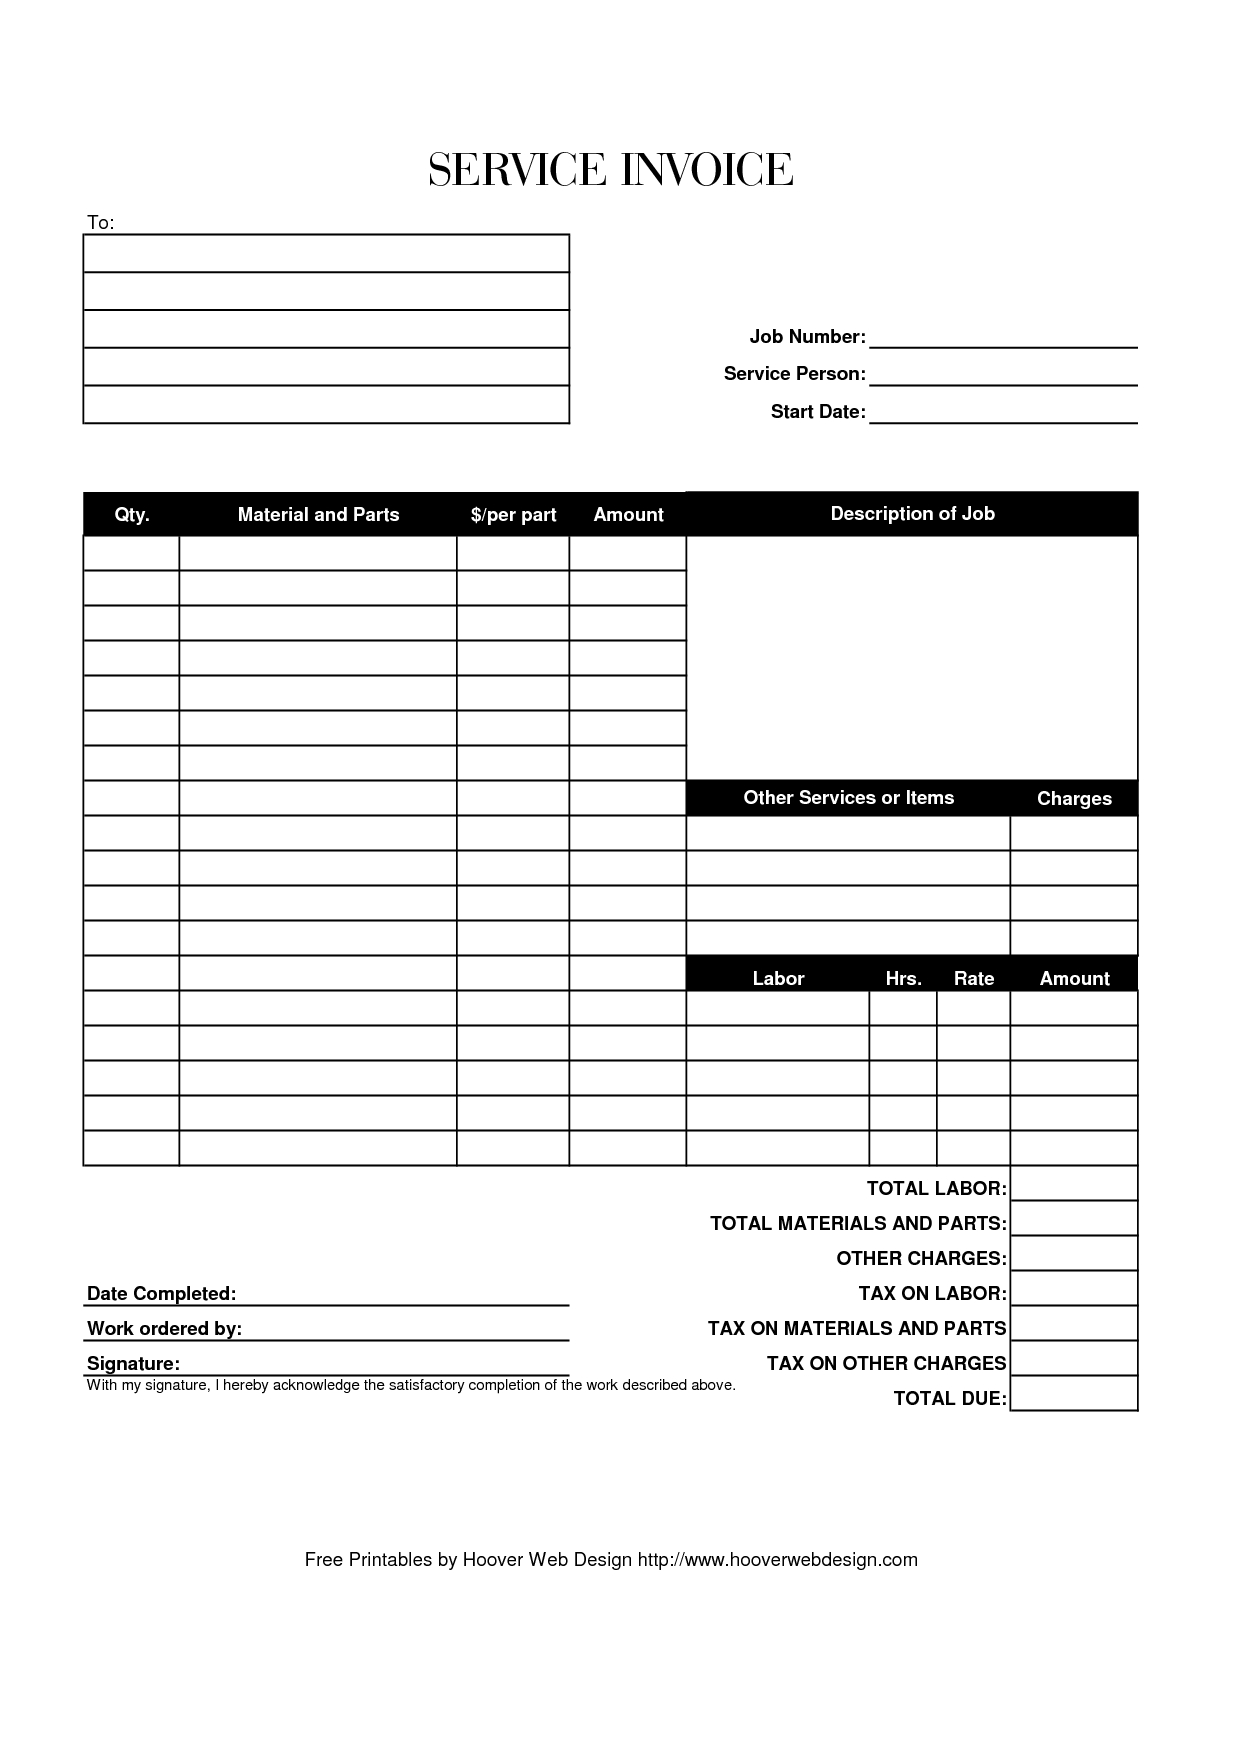 blank of invoice best resume pdf download free blank invoices printable